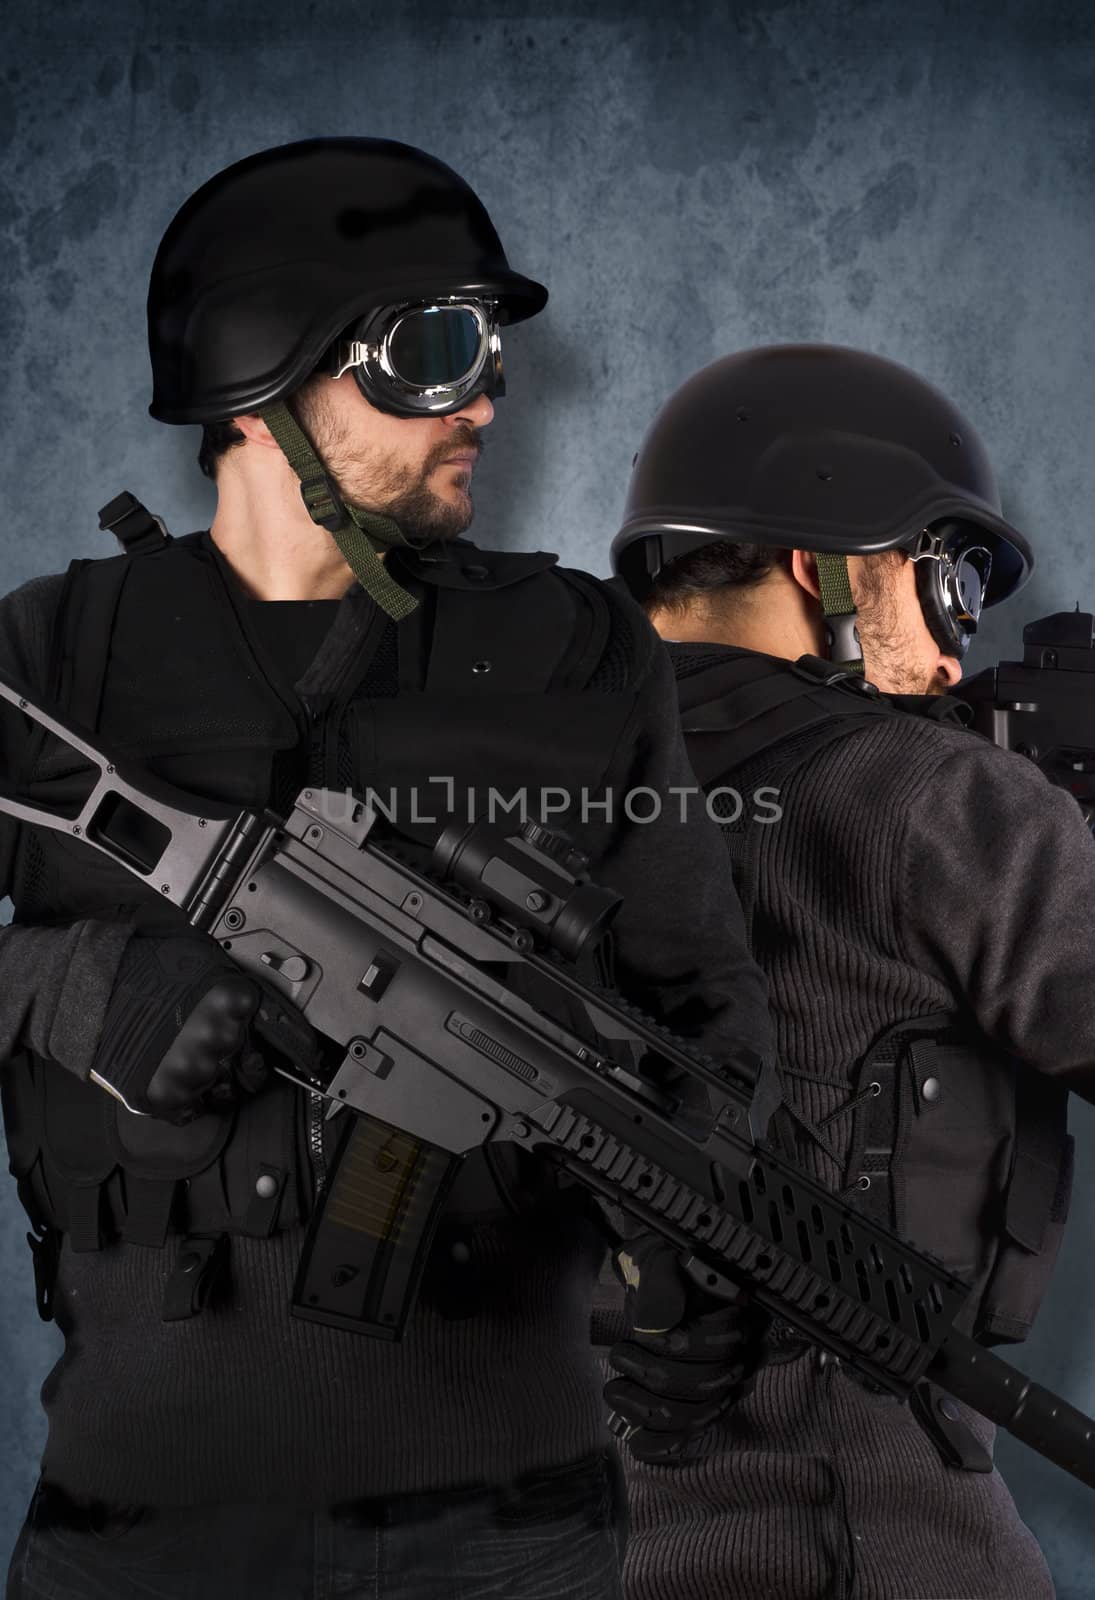 Two soldiers, swat and police concept